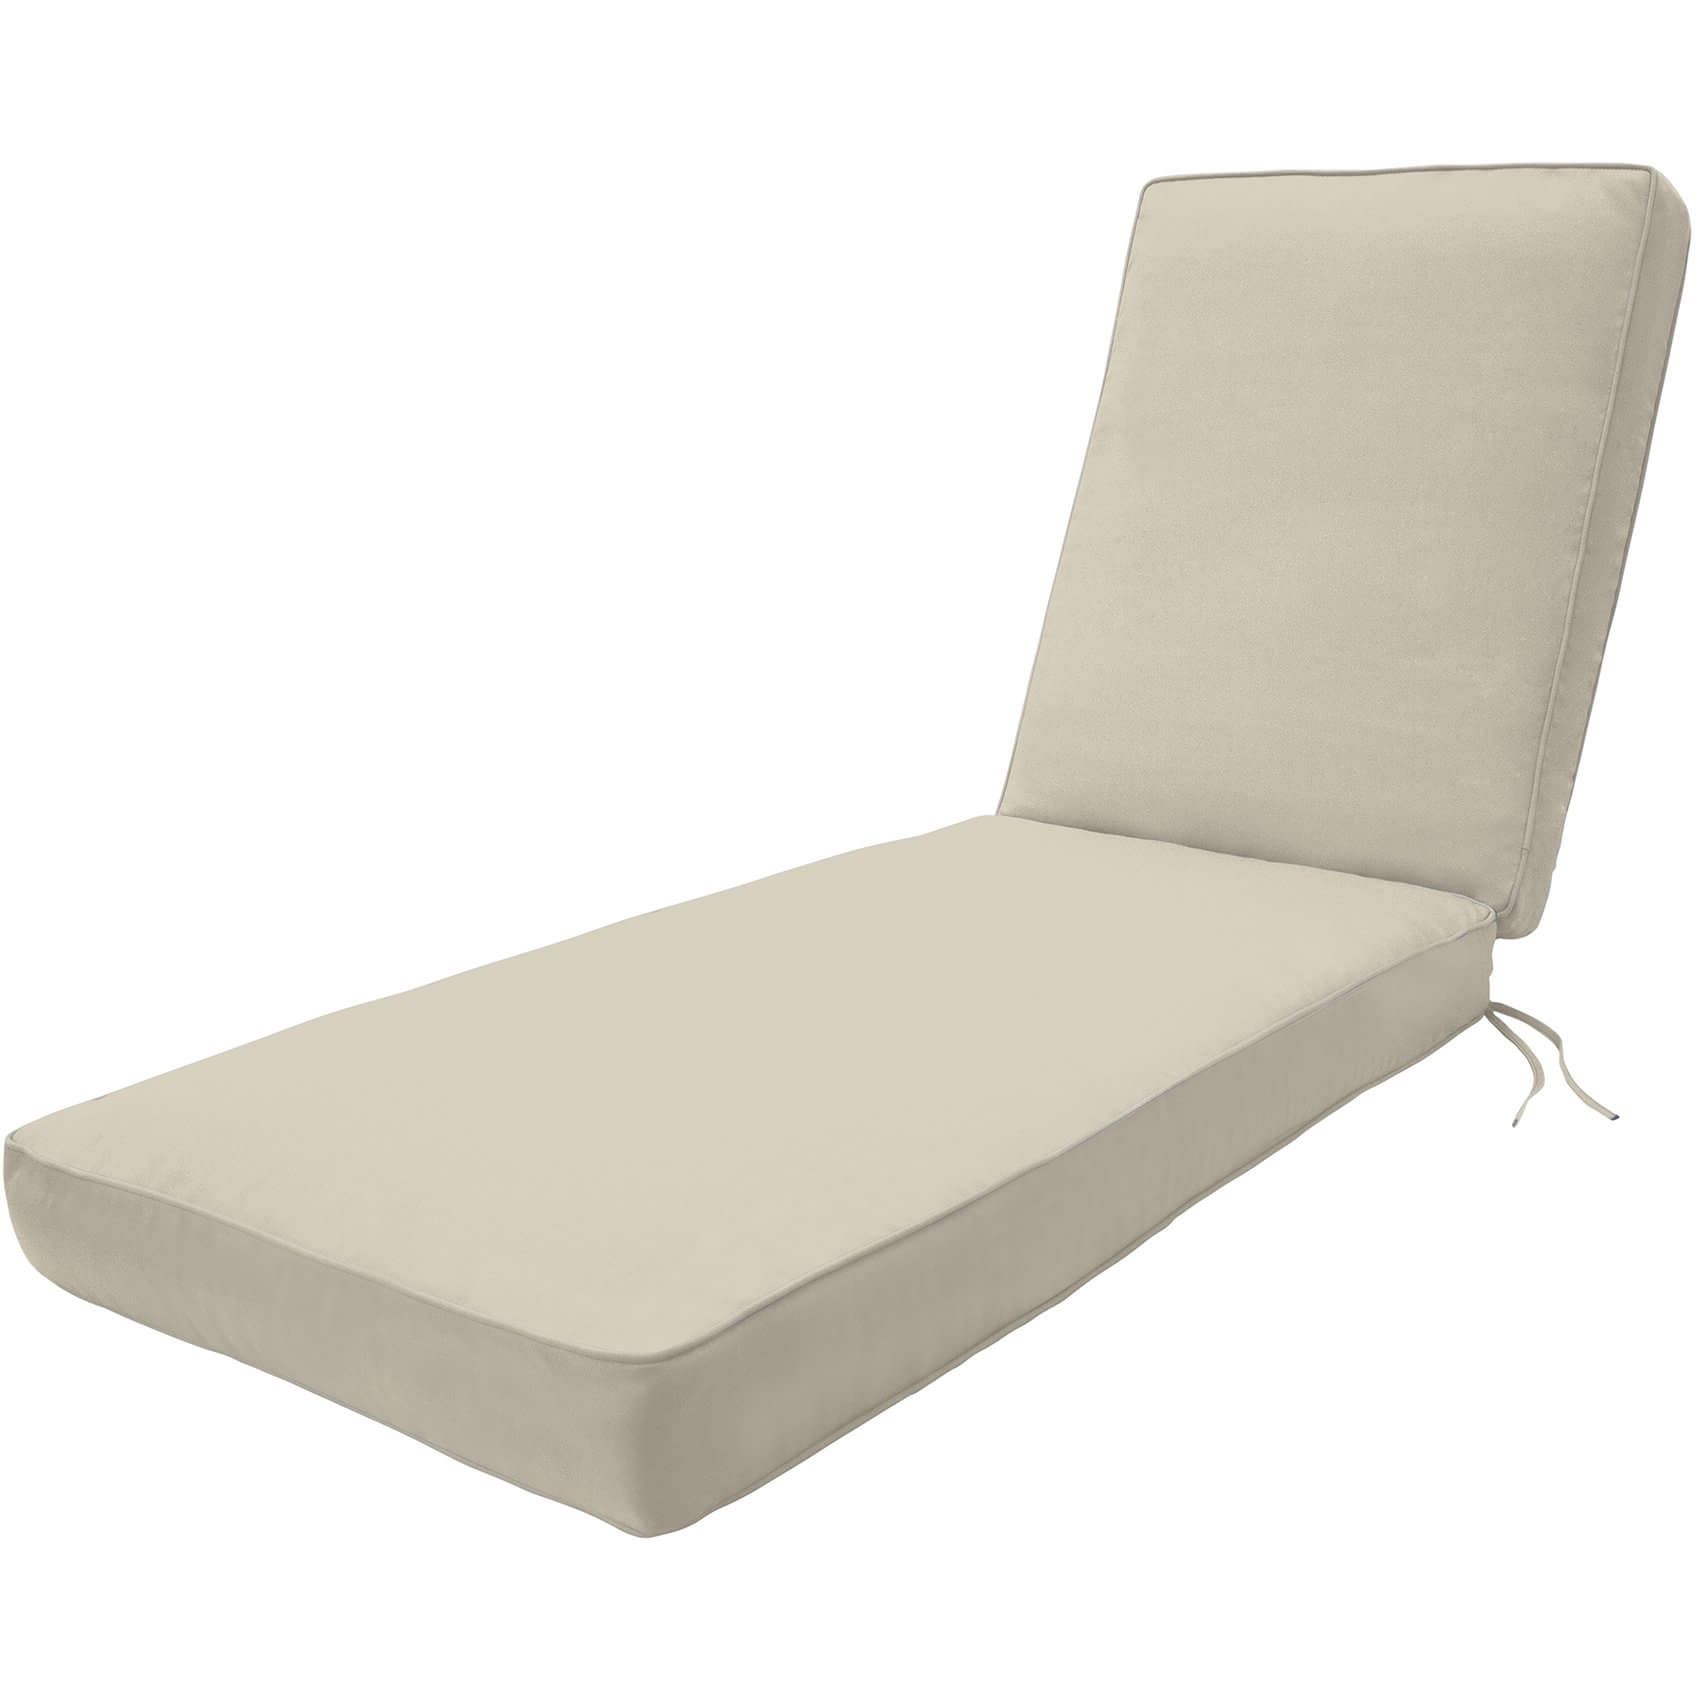 Outdoor : Target Chaise Lounge Chaise Lounge Replacement Cushions In Most Popular Target Chaise Lounge Cushions (View 13 of 15)